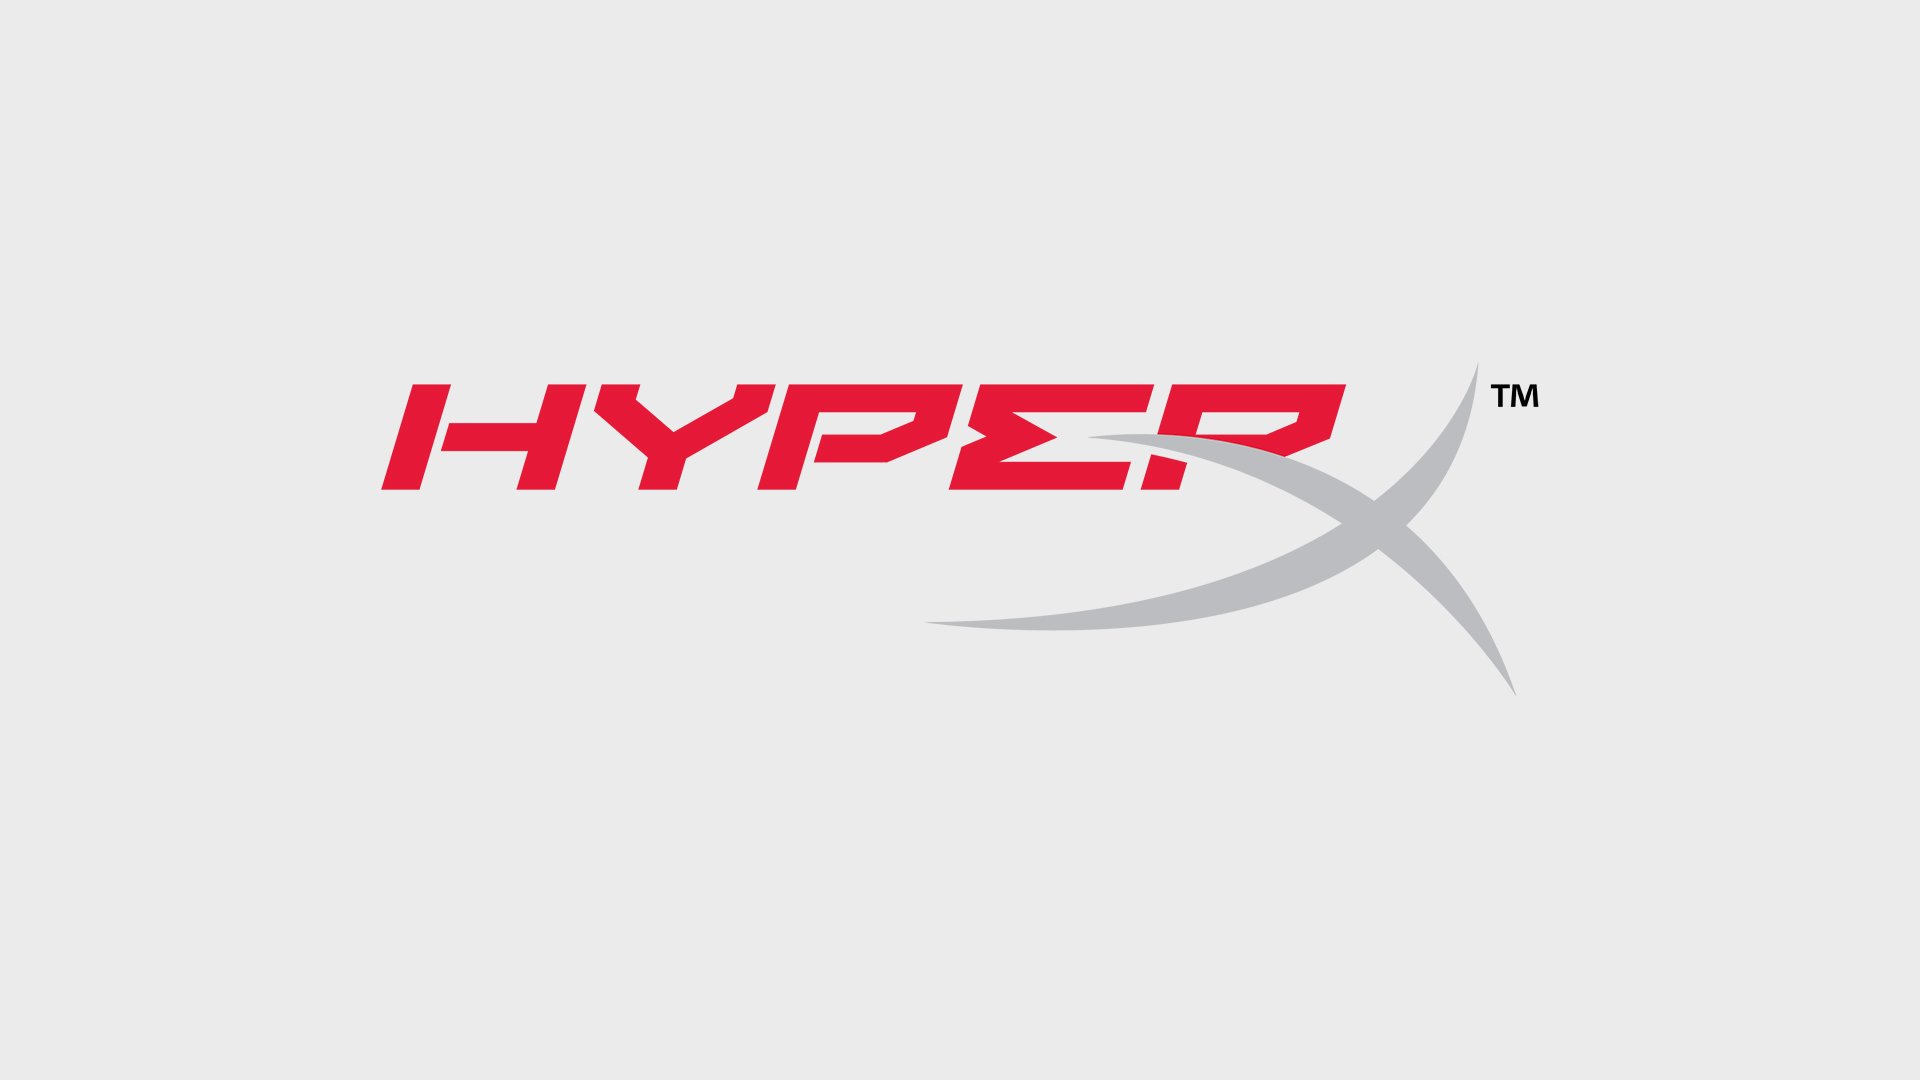 HyperX introduces new gaming products at CES 2021